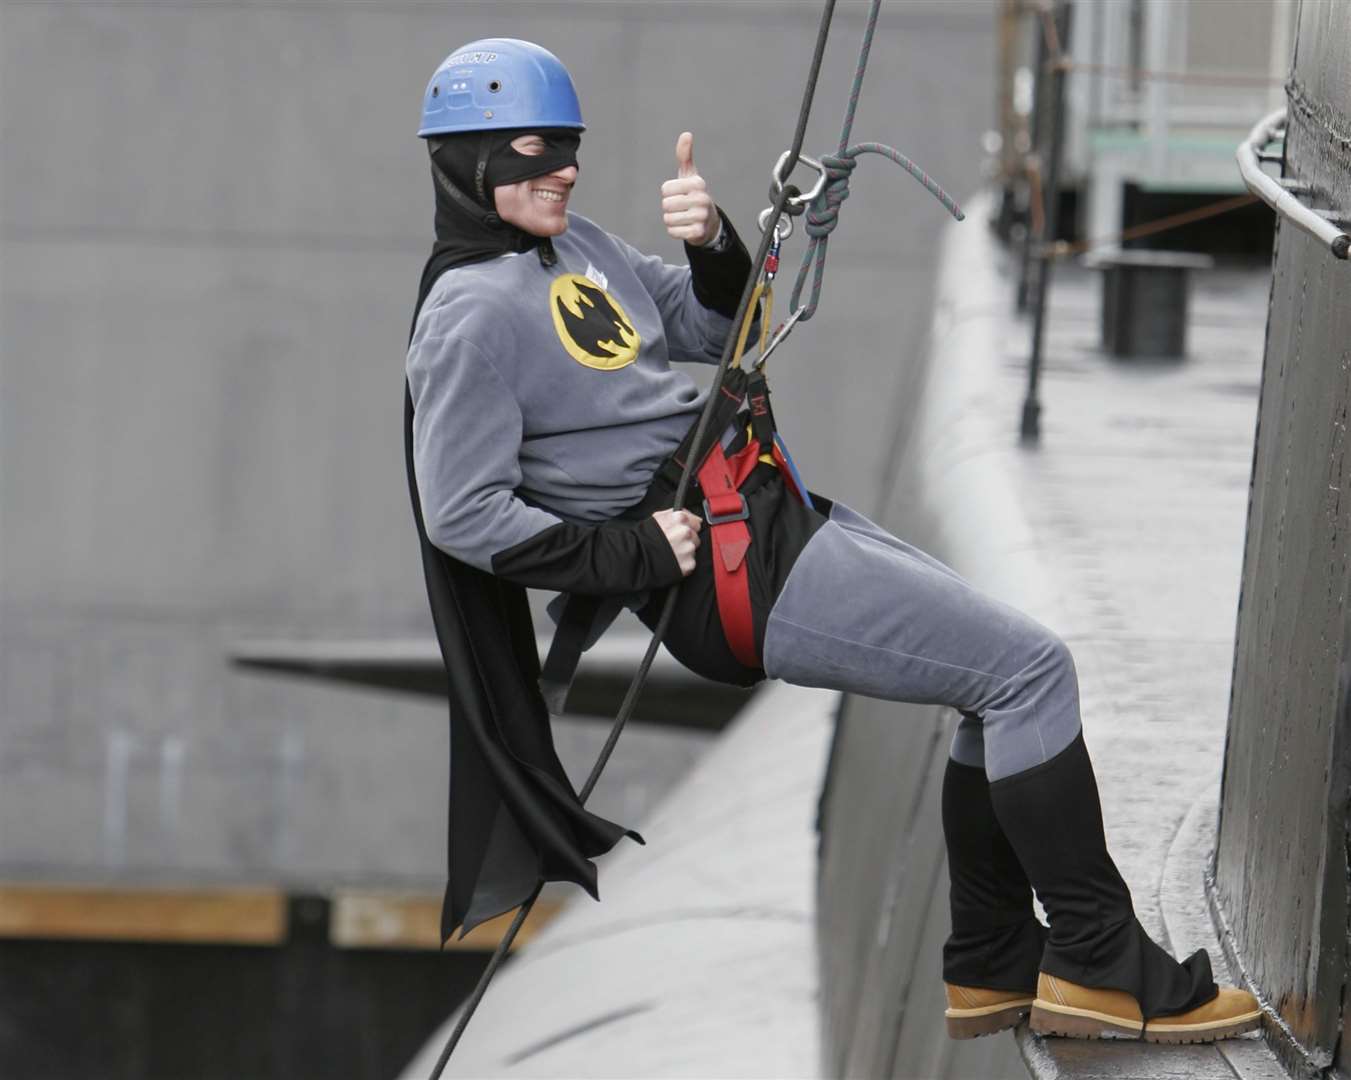 Paul Margerum as Batman took part in the sponsored abseil on Ocelot in 2007